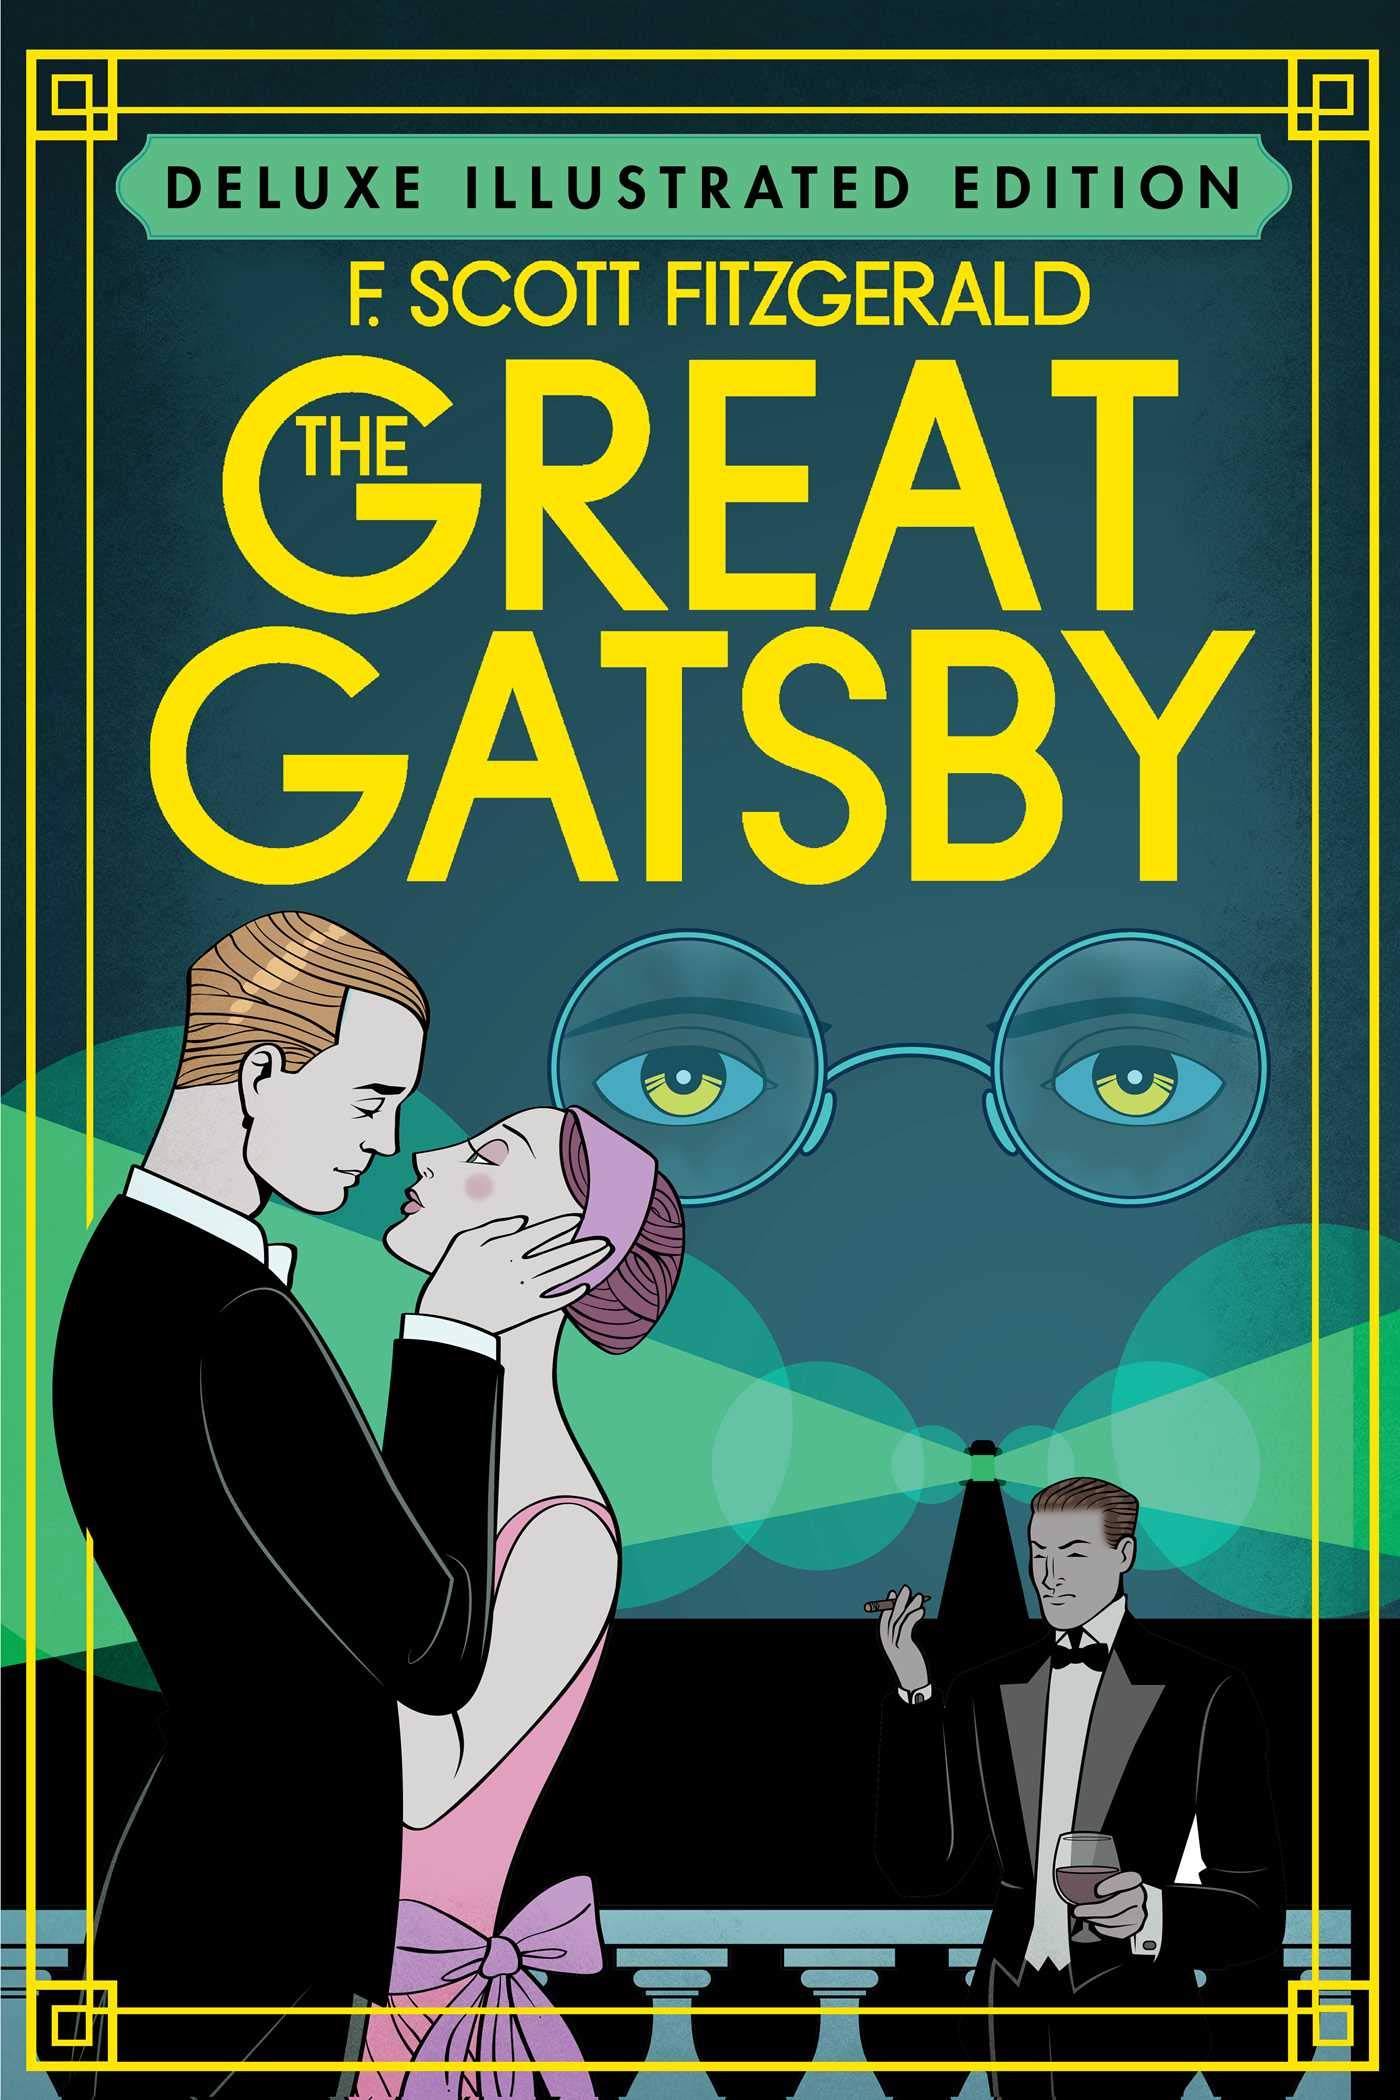 literature review the great gatsby